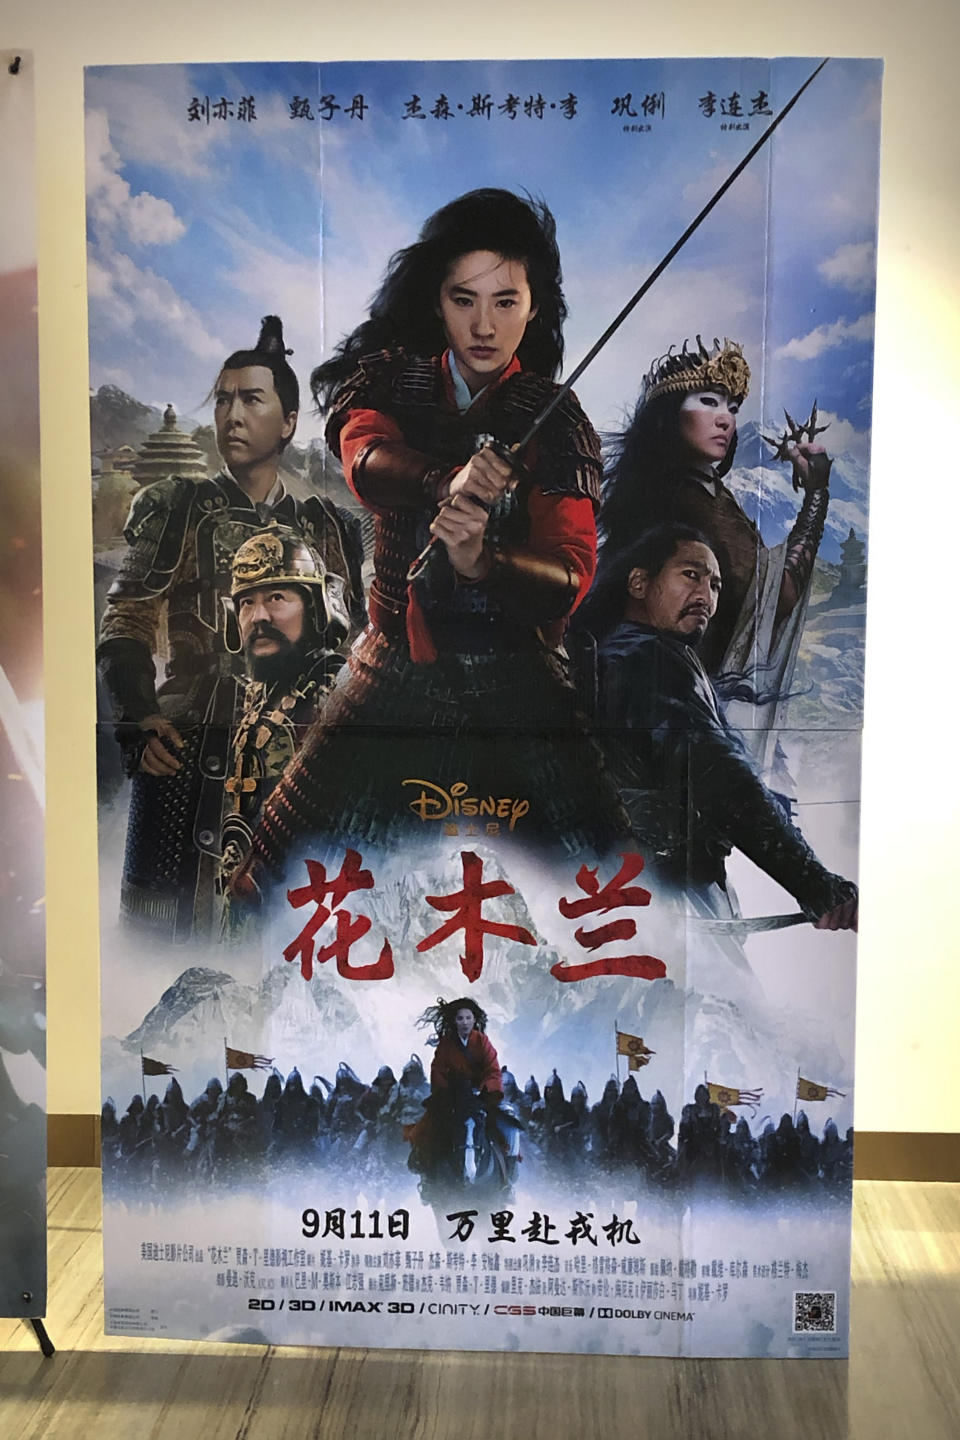 A poster for the Disney movie "Mulan" is displayed at a movie theater in Beijing on Sept. 11, 2020. The remake of “Mulan” struck all the right chords to be a hit in the key Chinese market. Disney cast beloved actresses Liu Yifei as Mulan and removed a popular dragon sidekick in the original to cater to Chinese tastes. (AP Photo/Mark Schiefelbein)